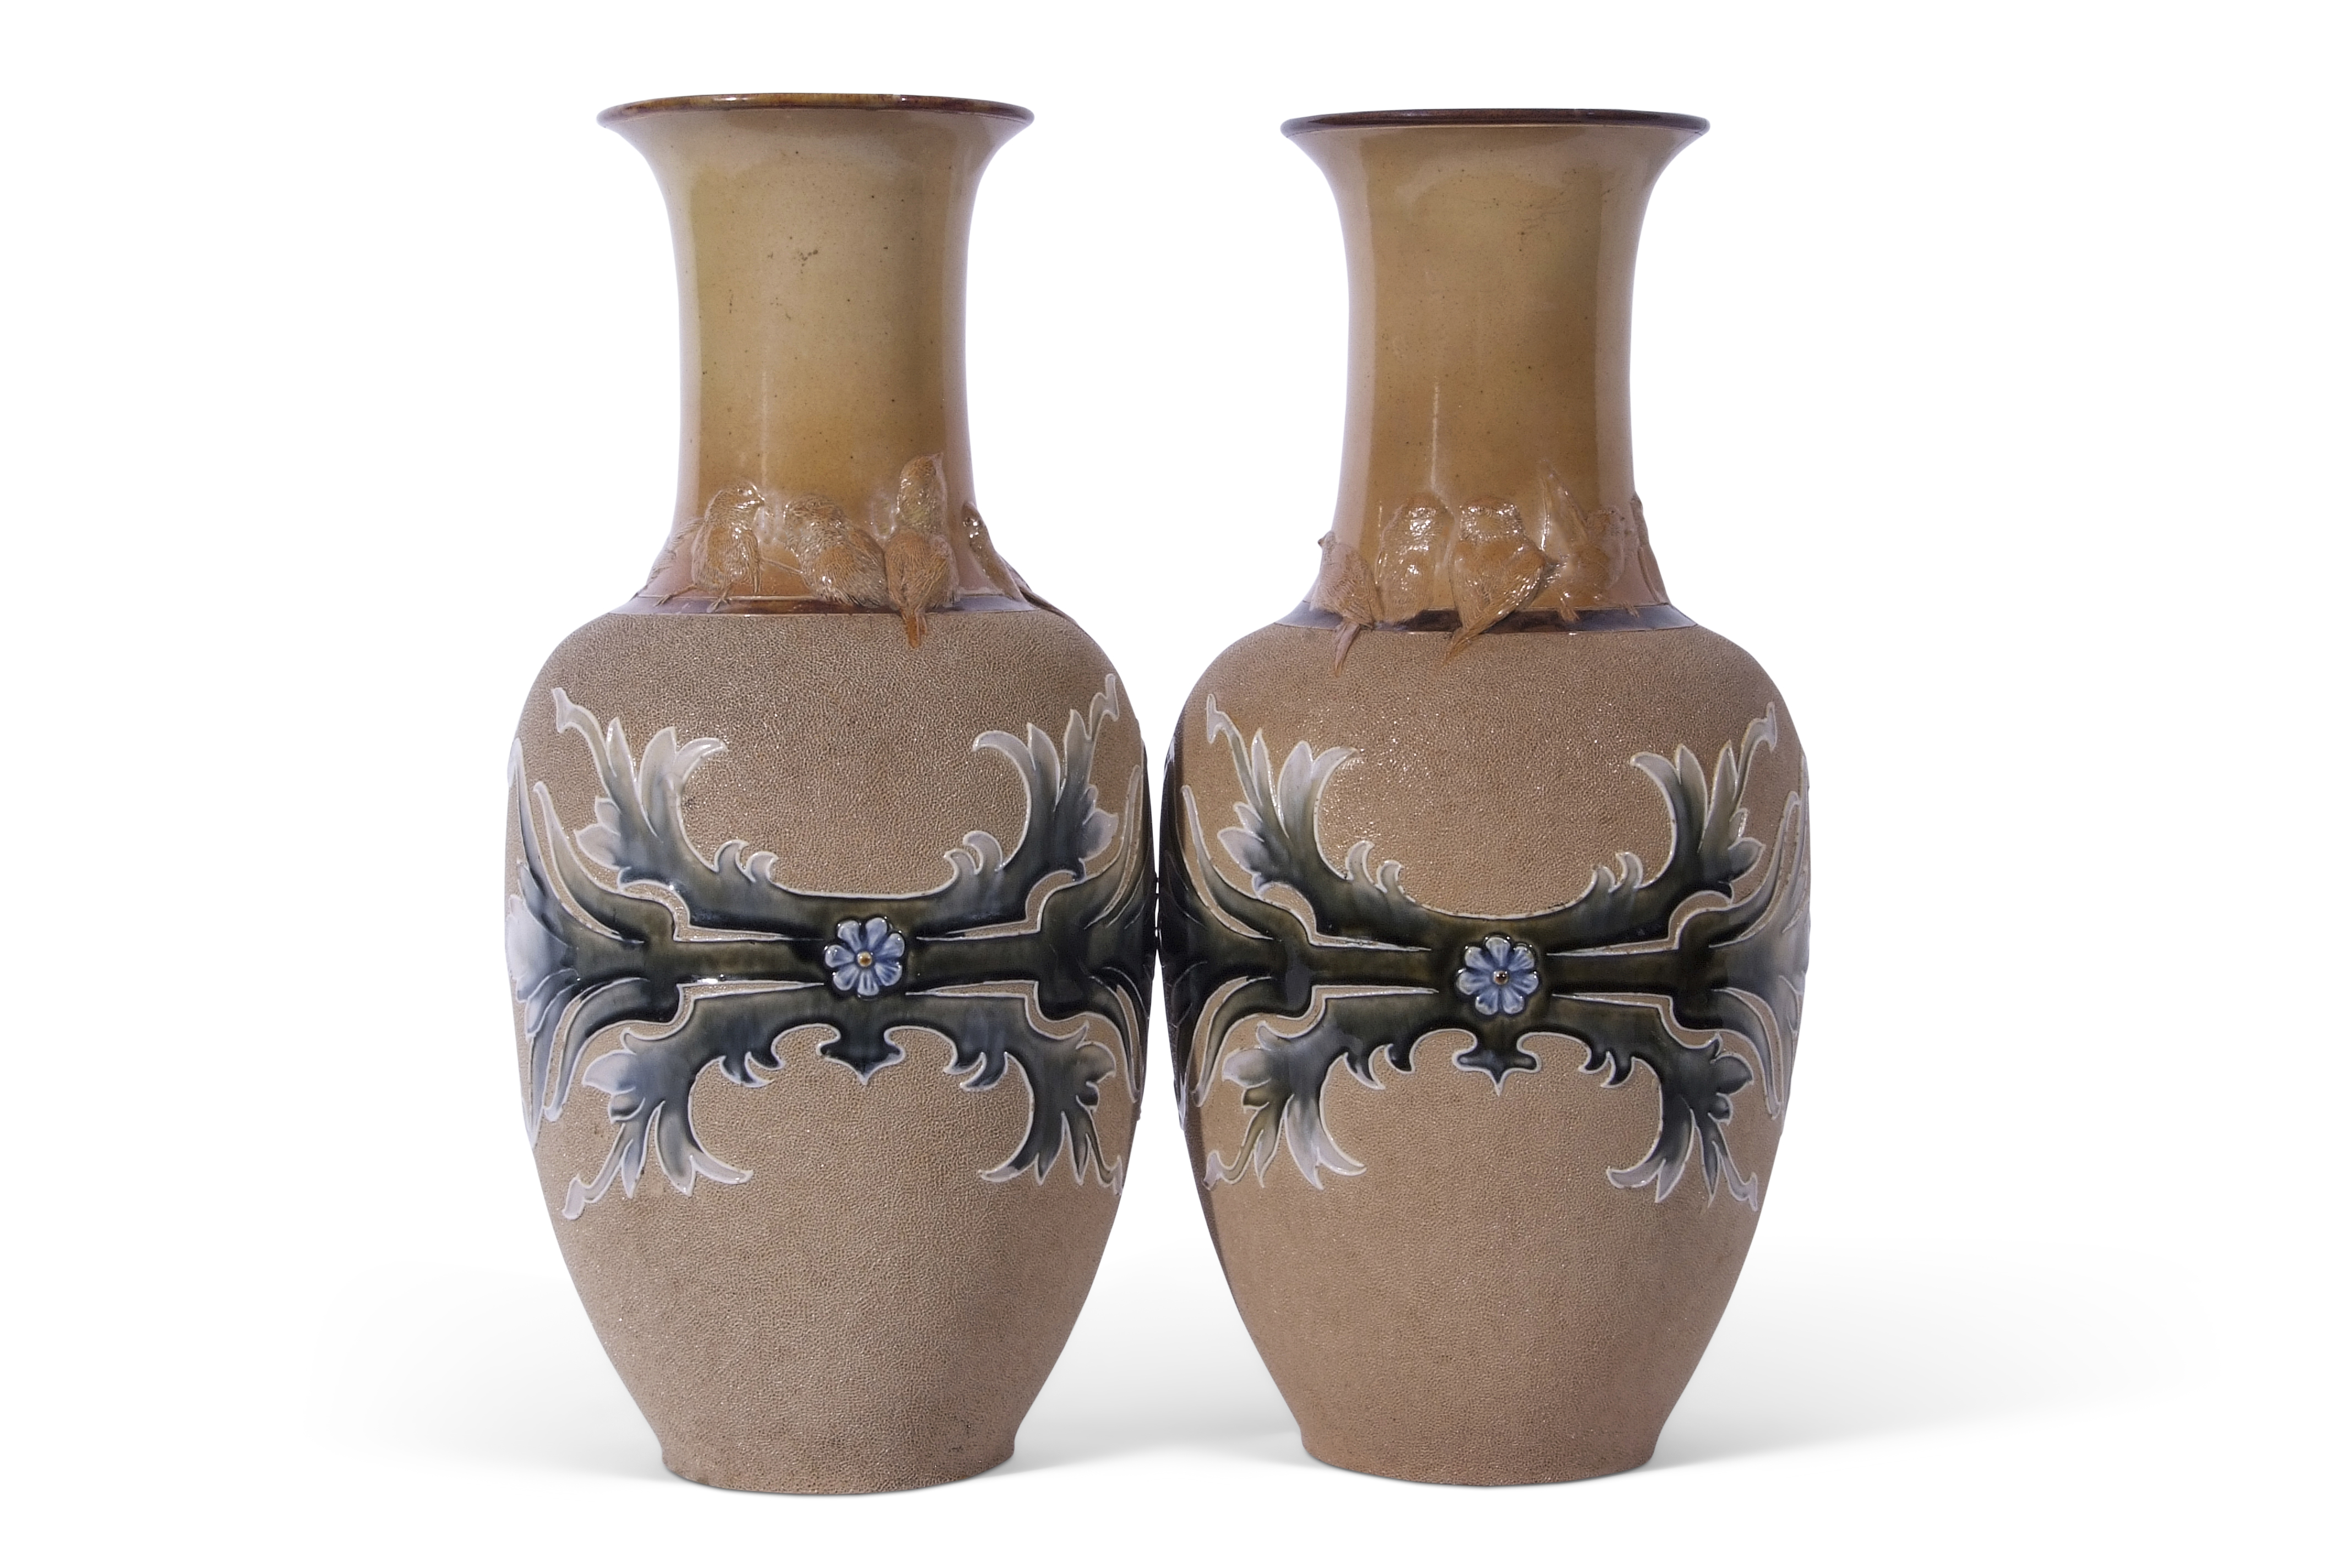 Pair of Doulton Lambeth vases, the stippled brown ground with a green floral design with birds in